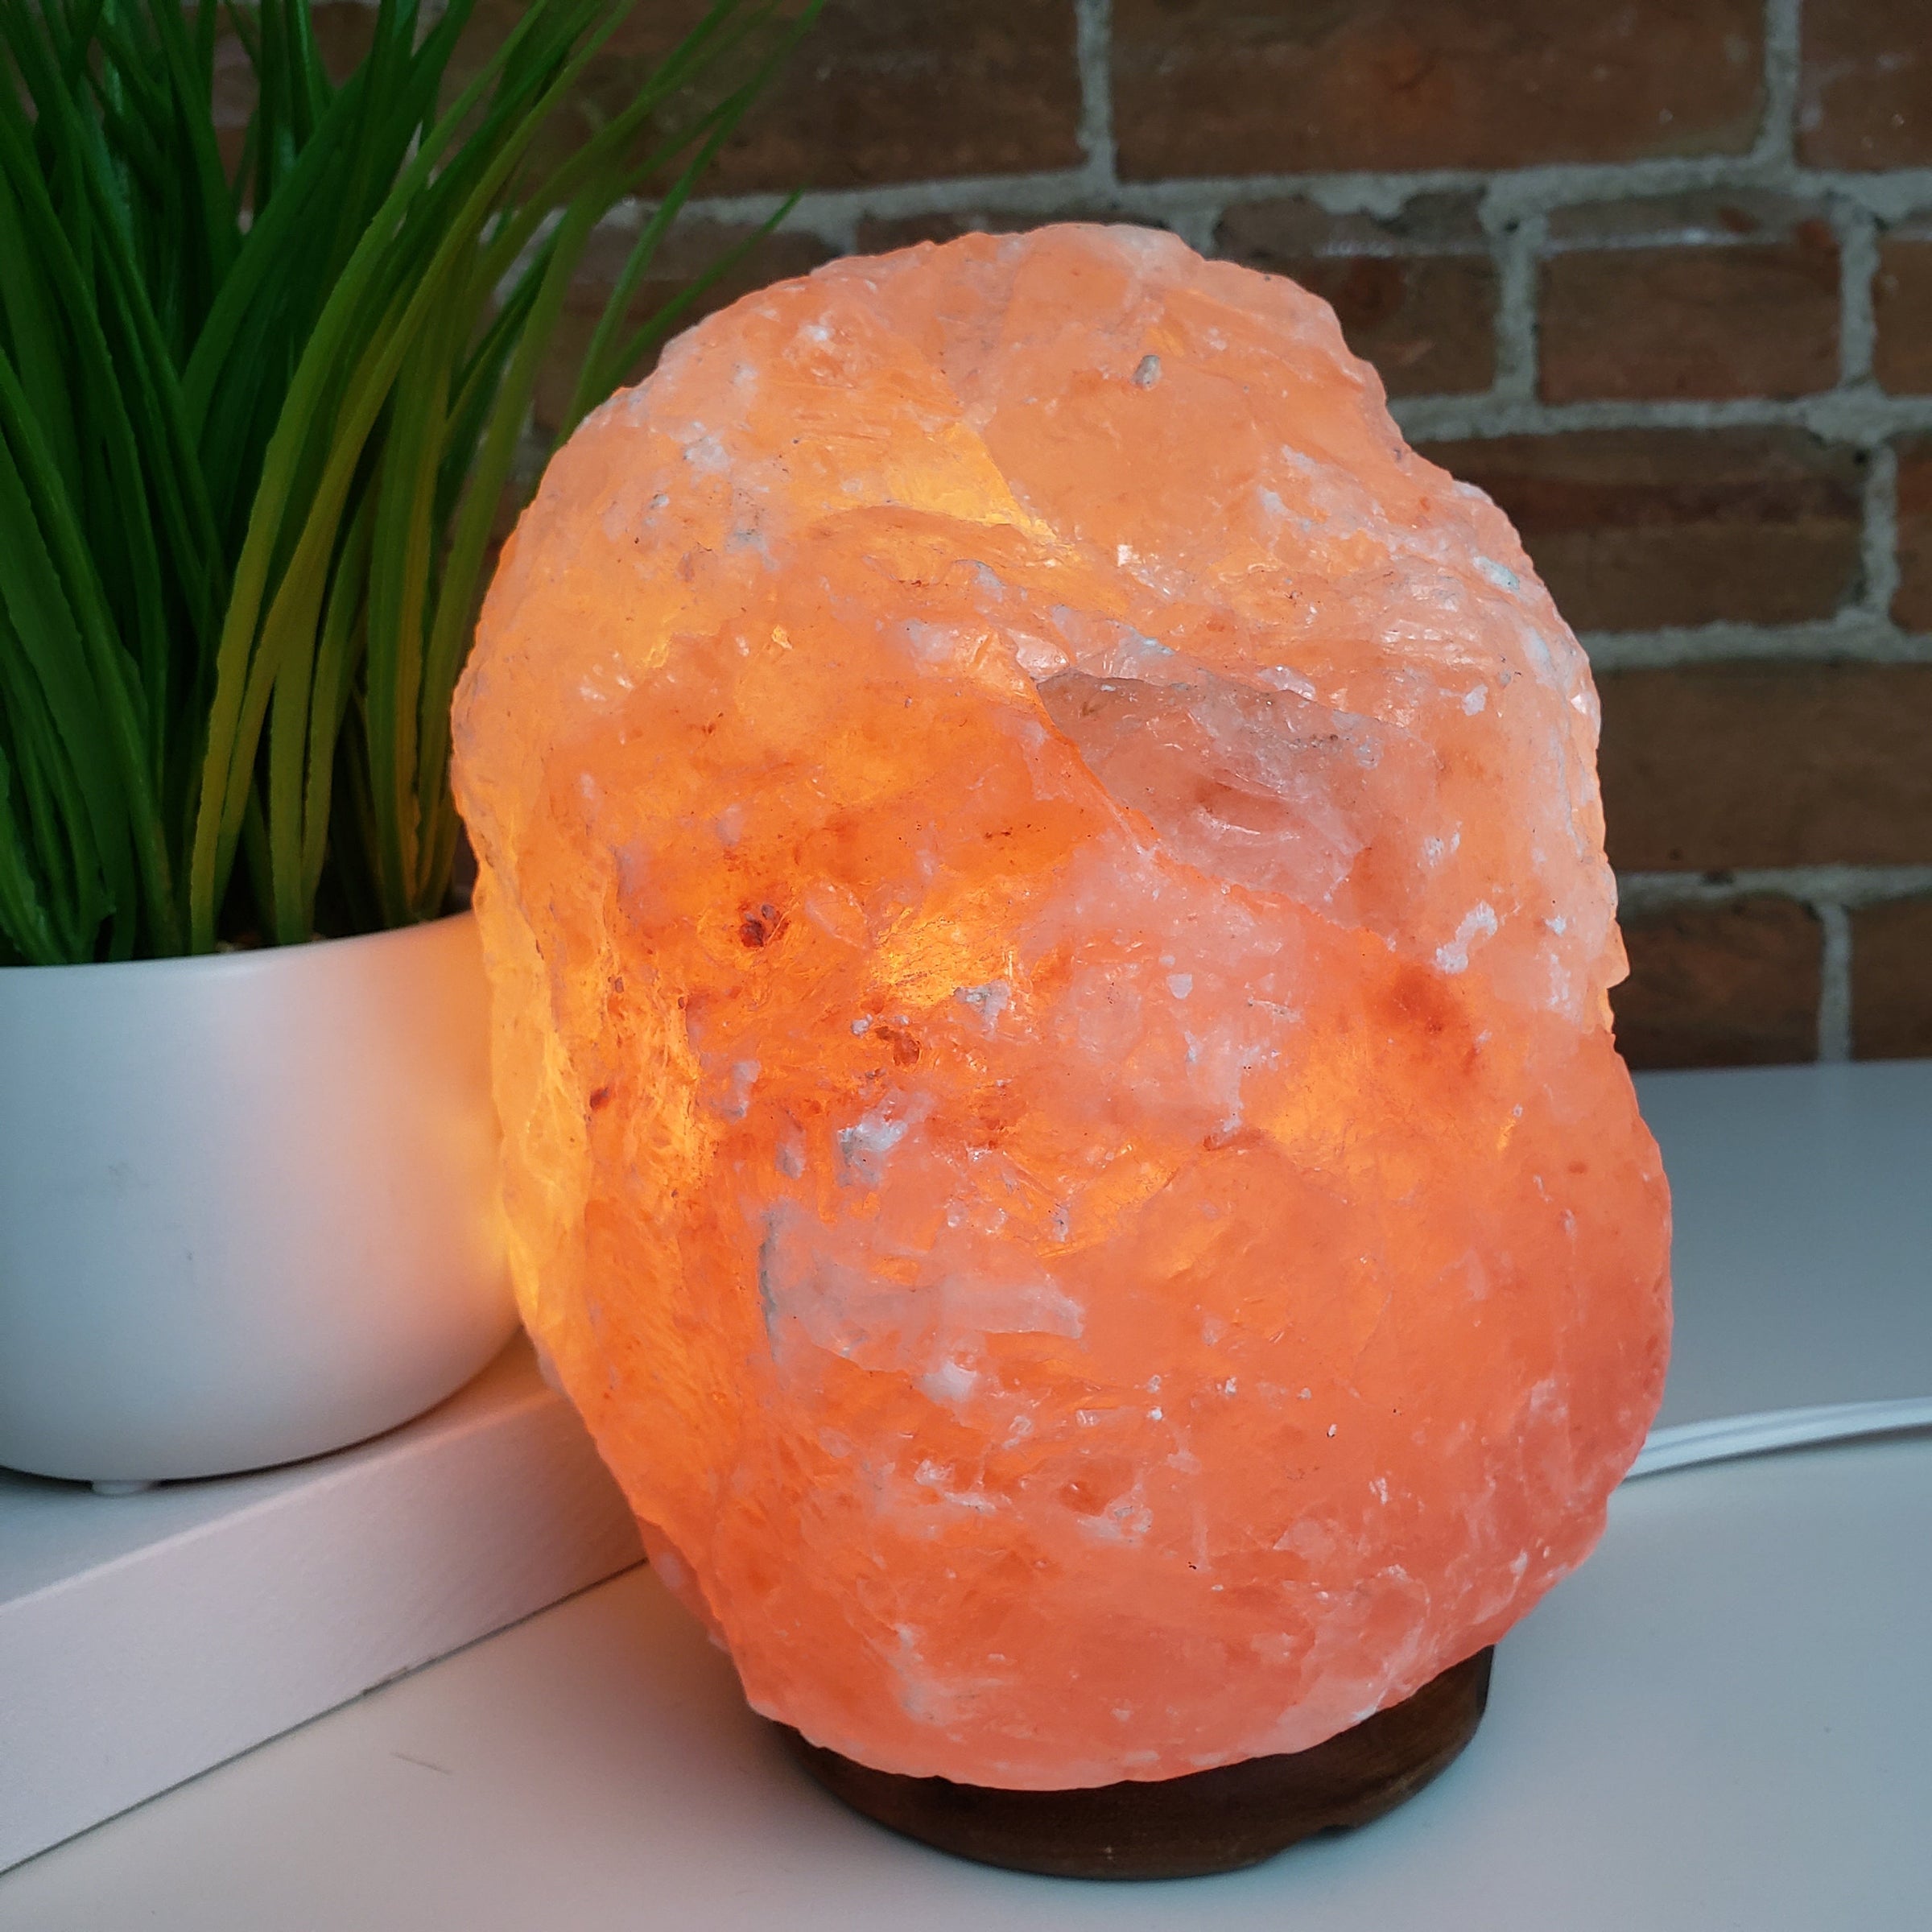 Pink Himalayan Salt Lamp on Wooden Base - 8" tall with bulb and cord